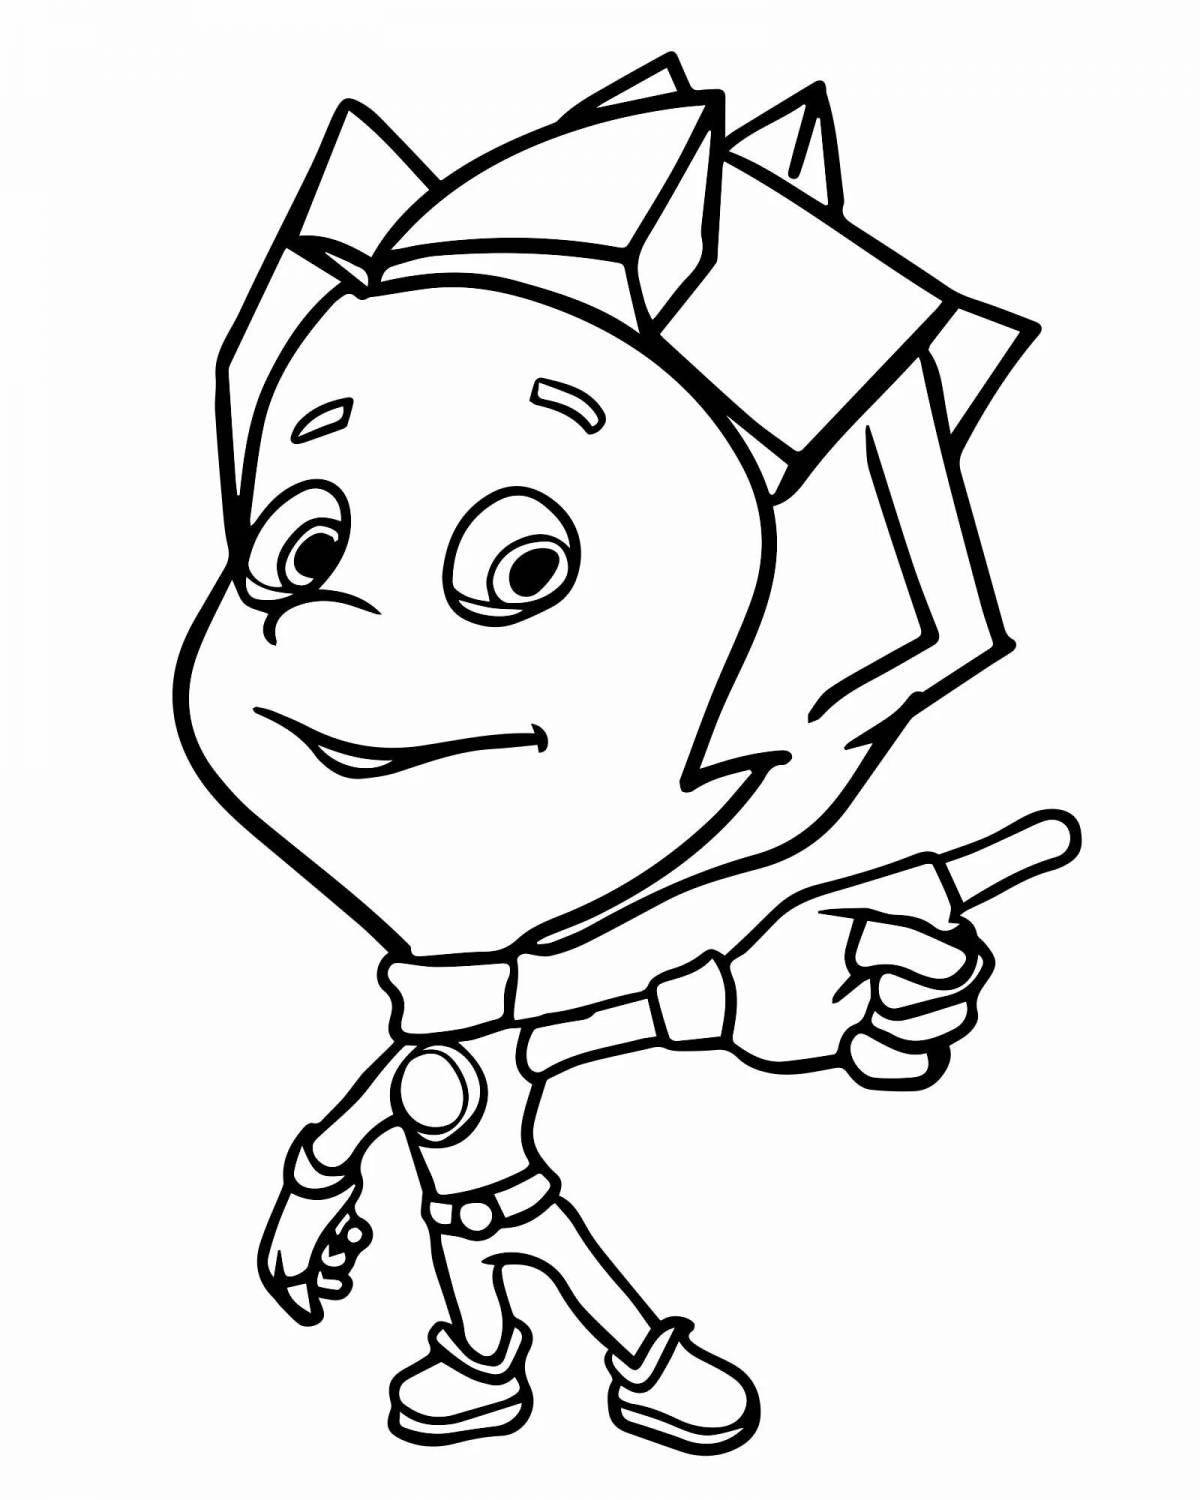 Exciting cartoon coloring pages for 4-5 year olds